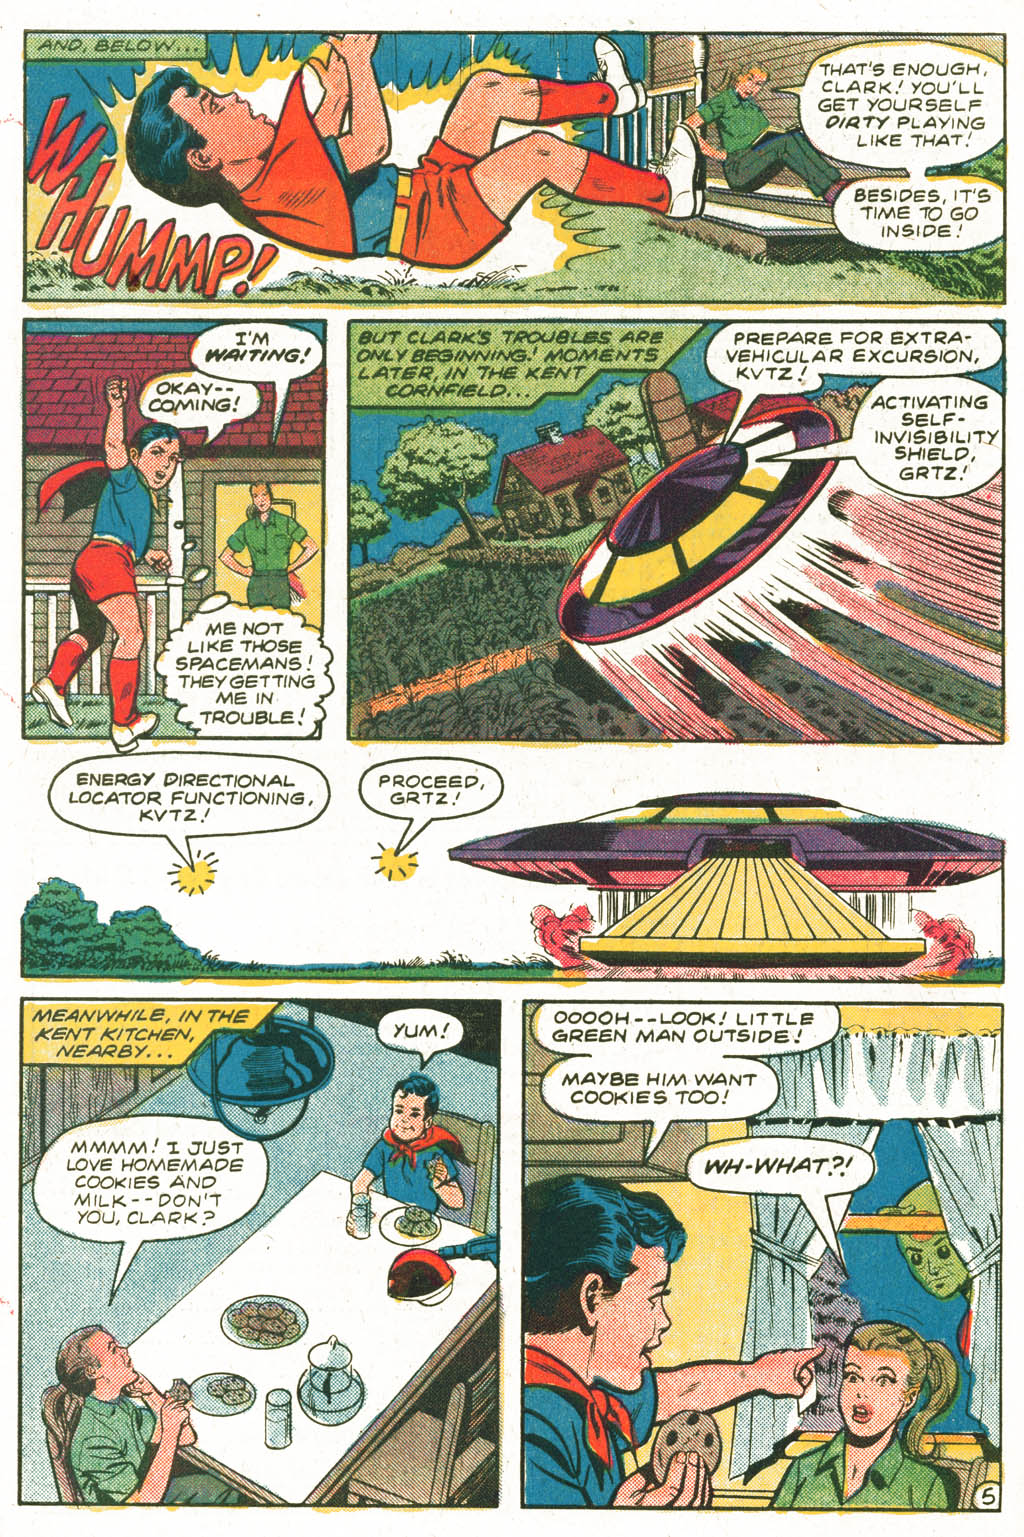 The New Adventures of Superboy 24 Page 24